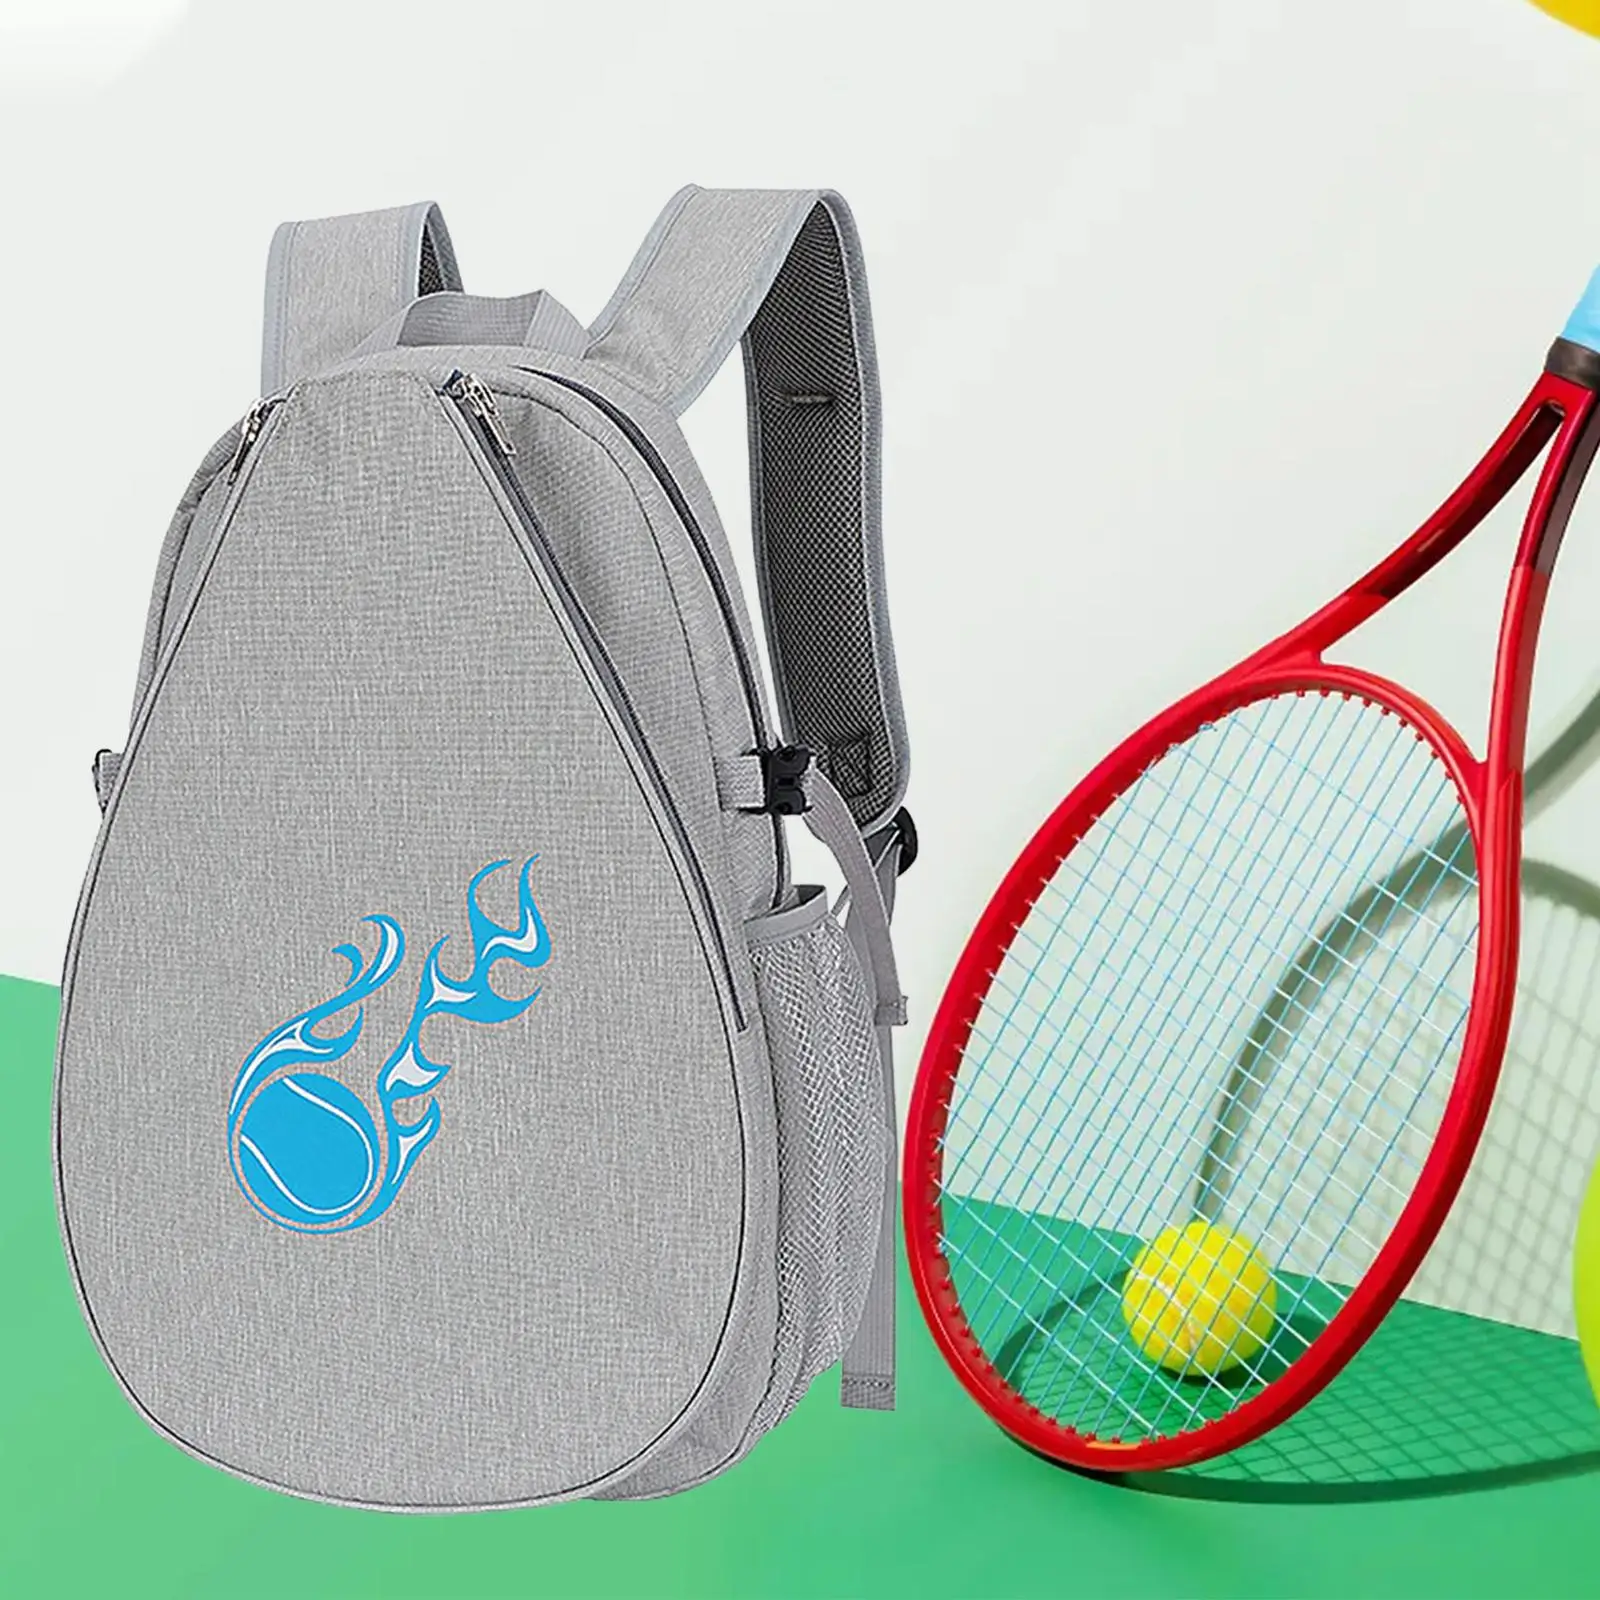 Tennis Backpack Tennis Bag for Pickleball Paddles, Badminton Racquet, Tennis Racket, Squash Racquet, Balls and Other Accessories